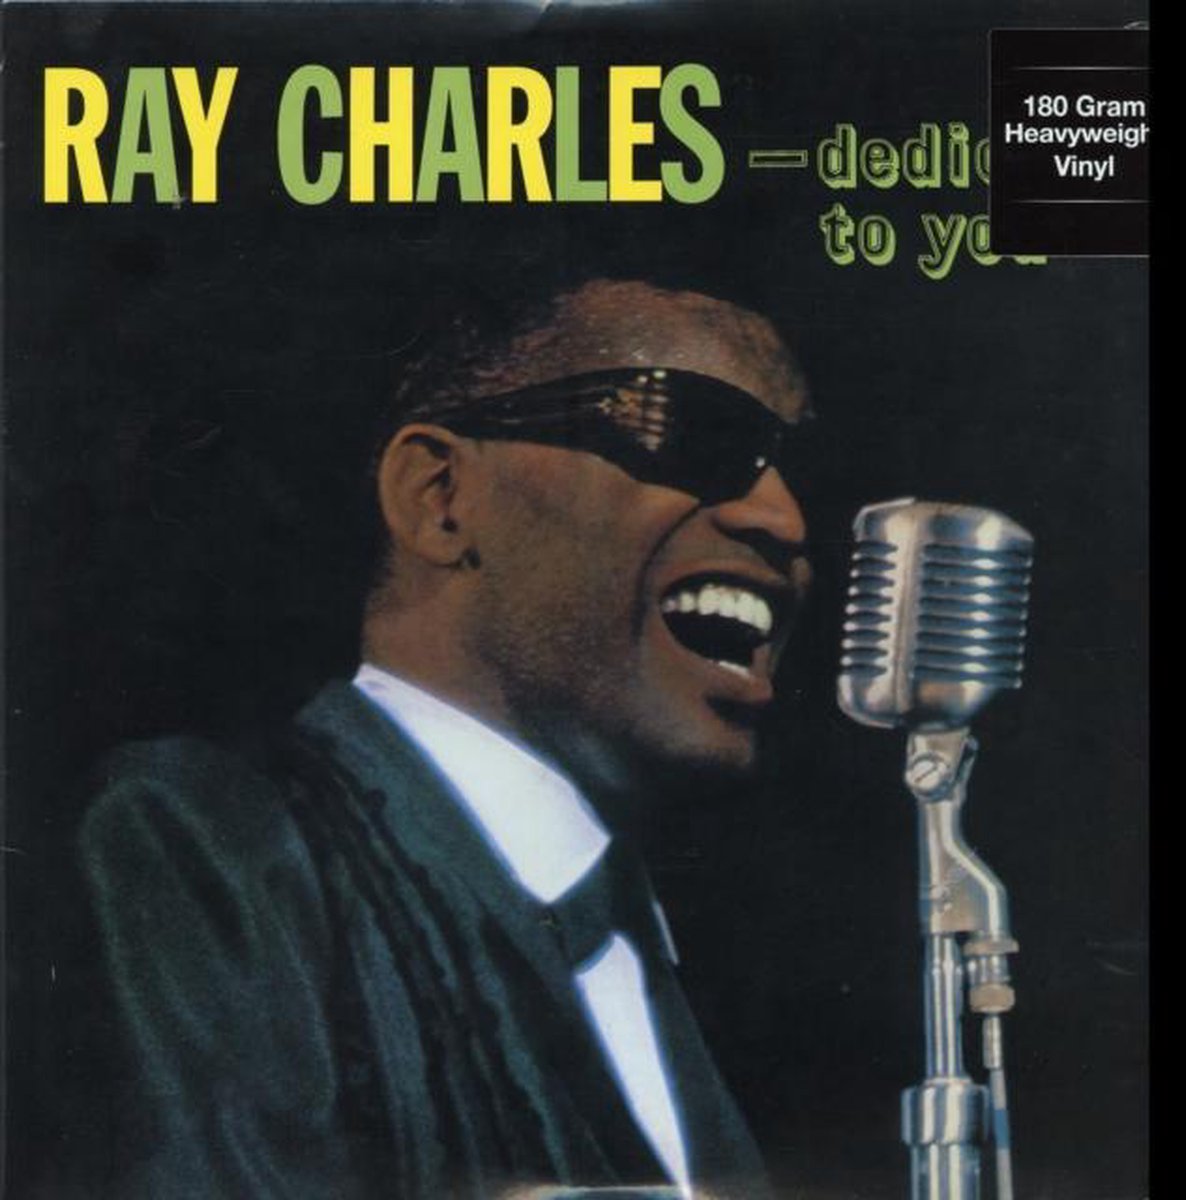 Dedicated to You - Vinyl | Ray Charles